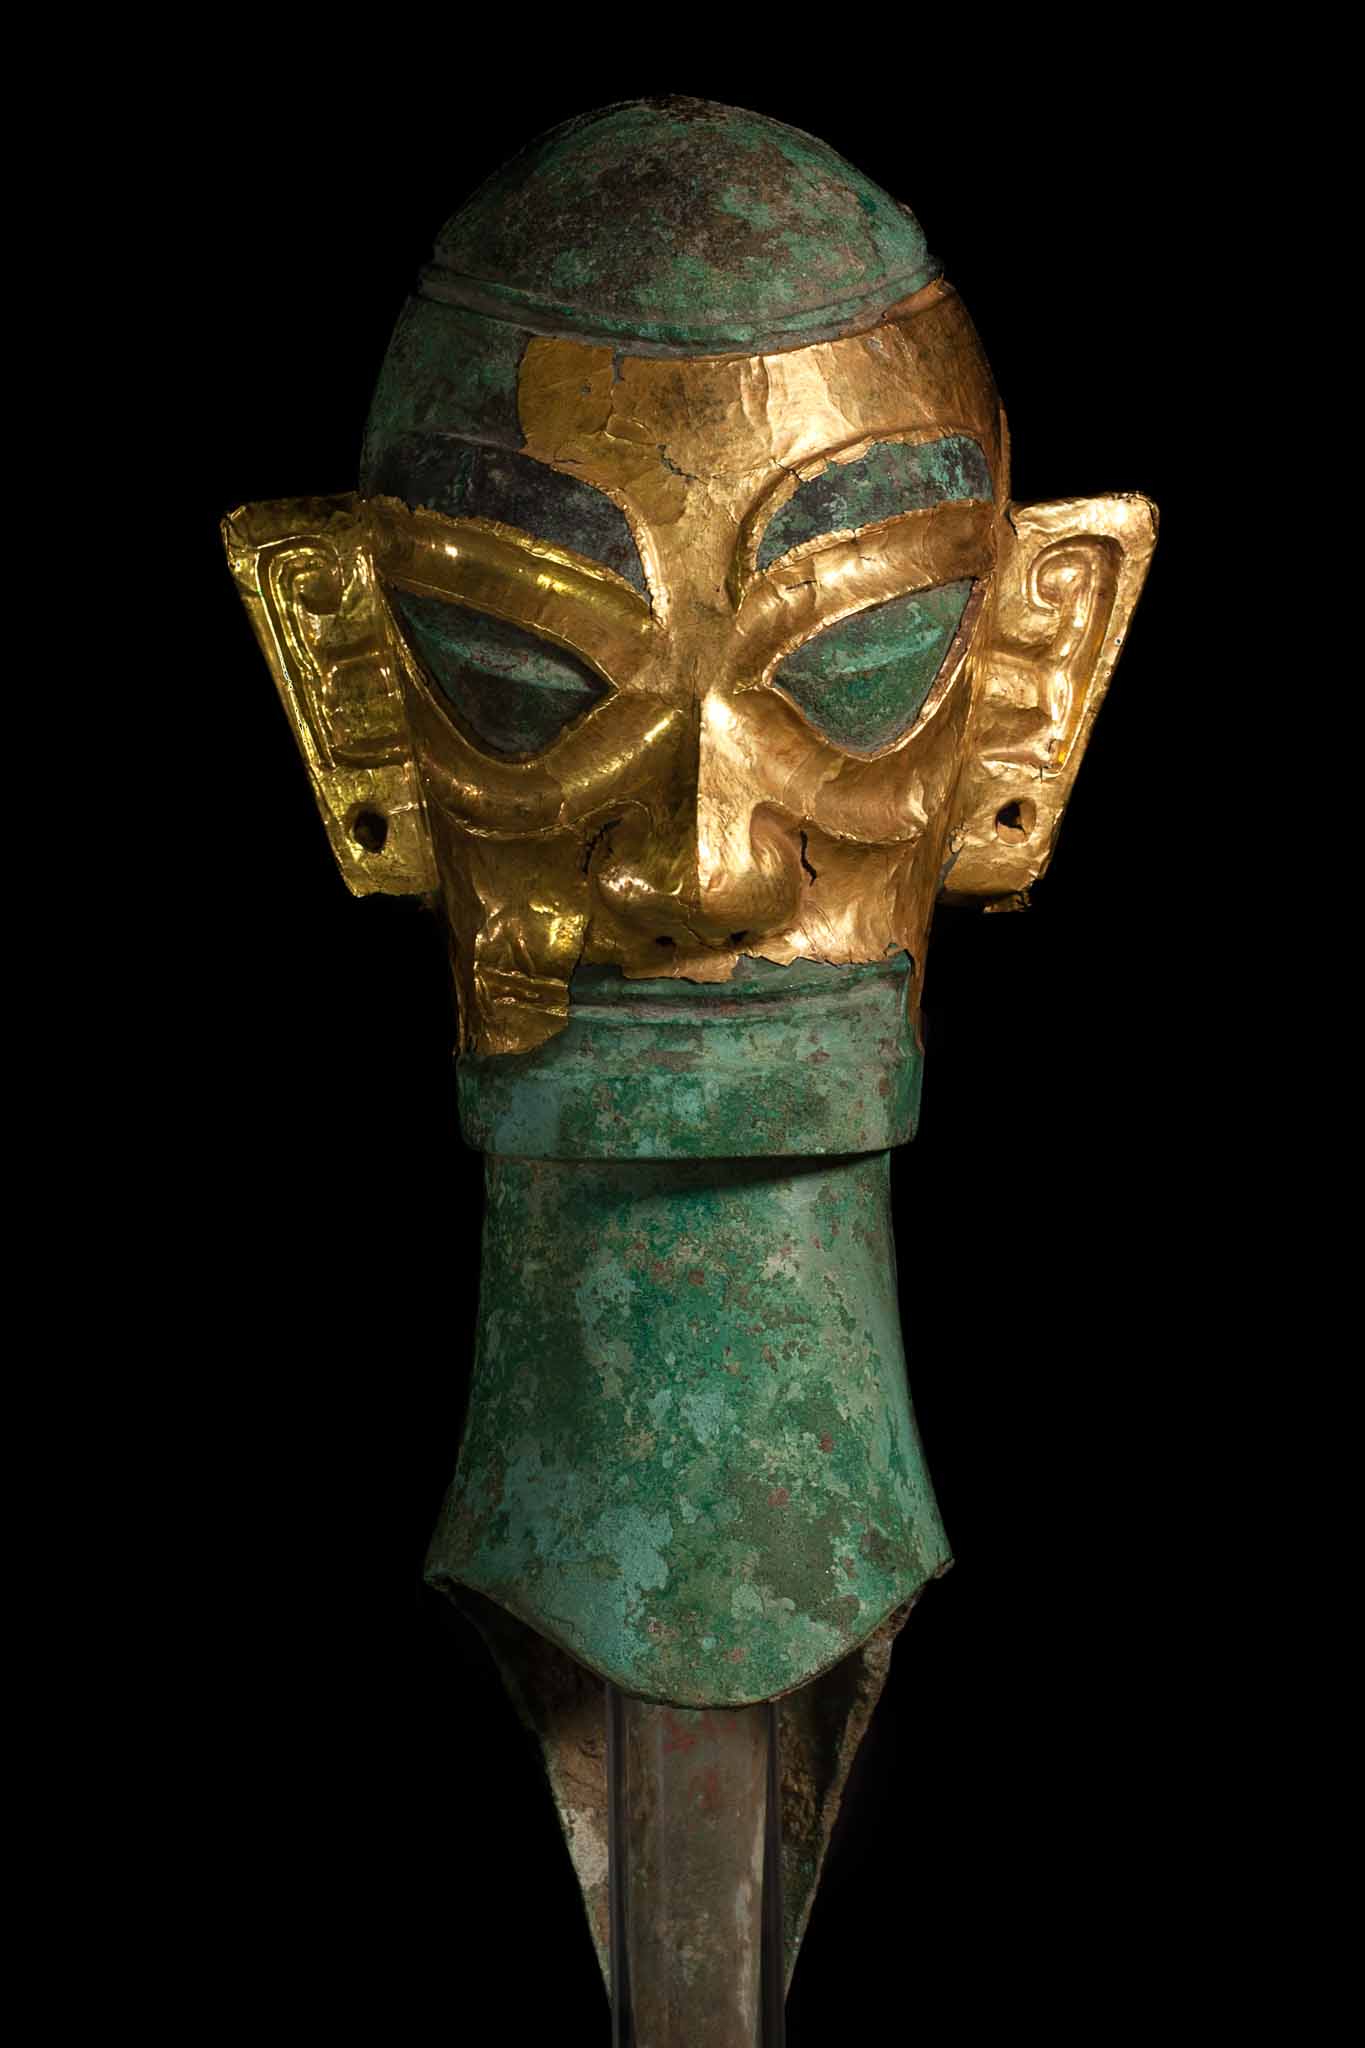 Human Head with Gold Foil Mask